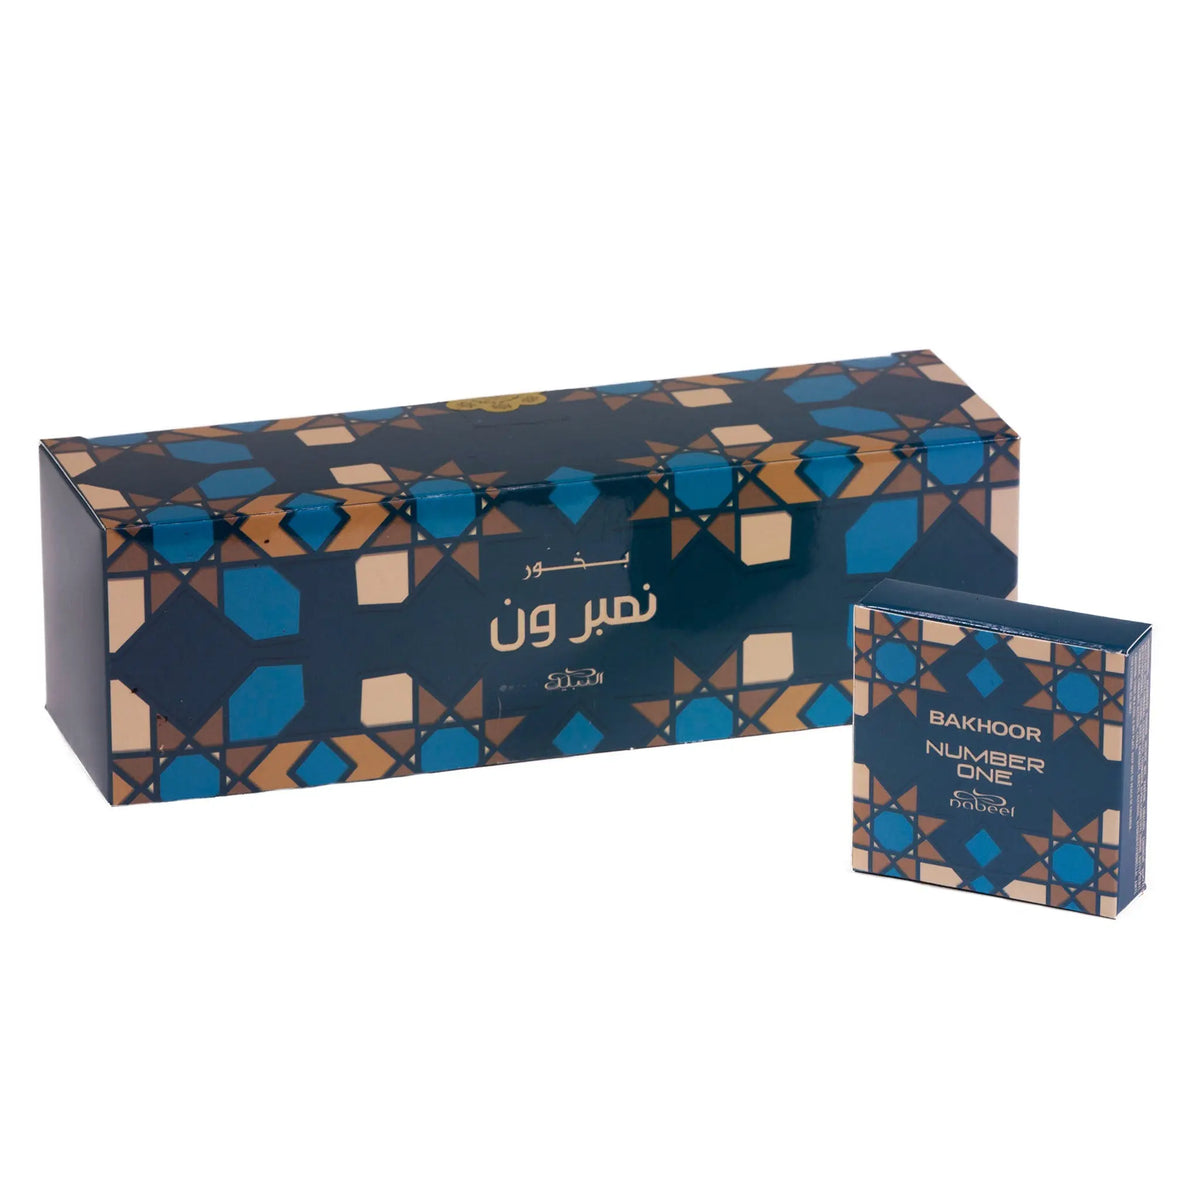 The image features two boxes of "Bakhoor Number One" against a white background. The larger box is rectangular and displays a geometric pattern in shades of blue, gold, and brown with Arabic script and English text. The smaller box shows a similar design and color scheme with the product name in English.